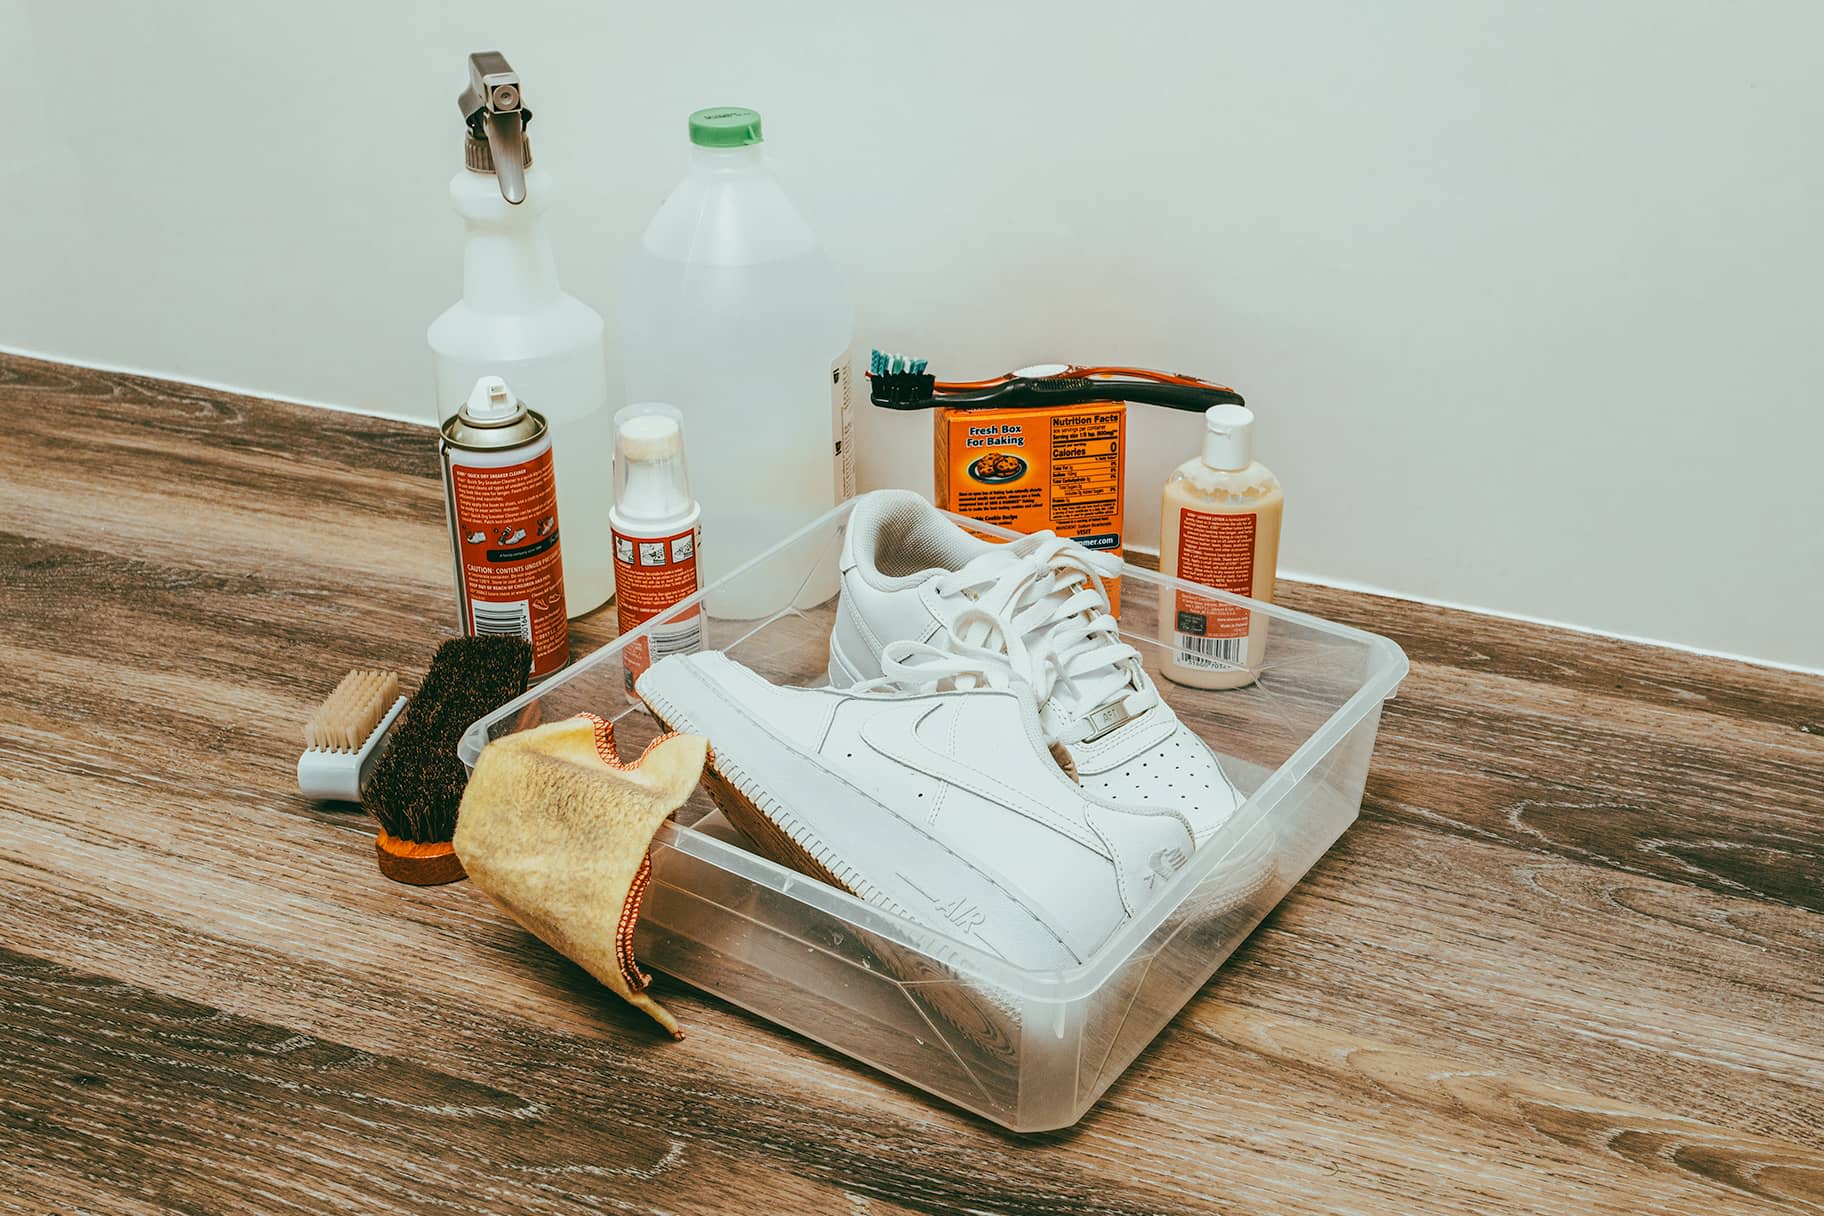 How to Clean Air Force 1s